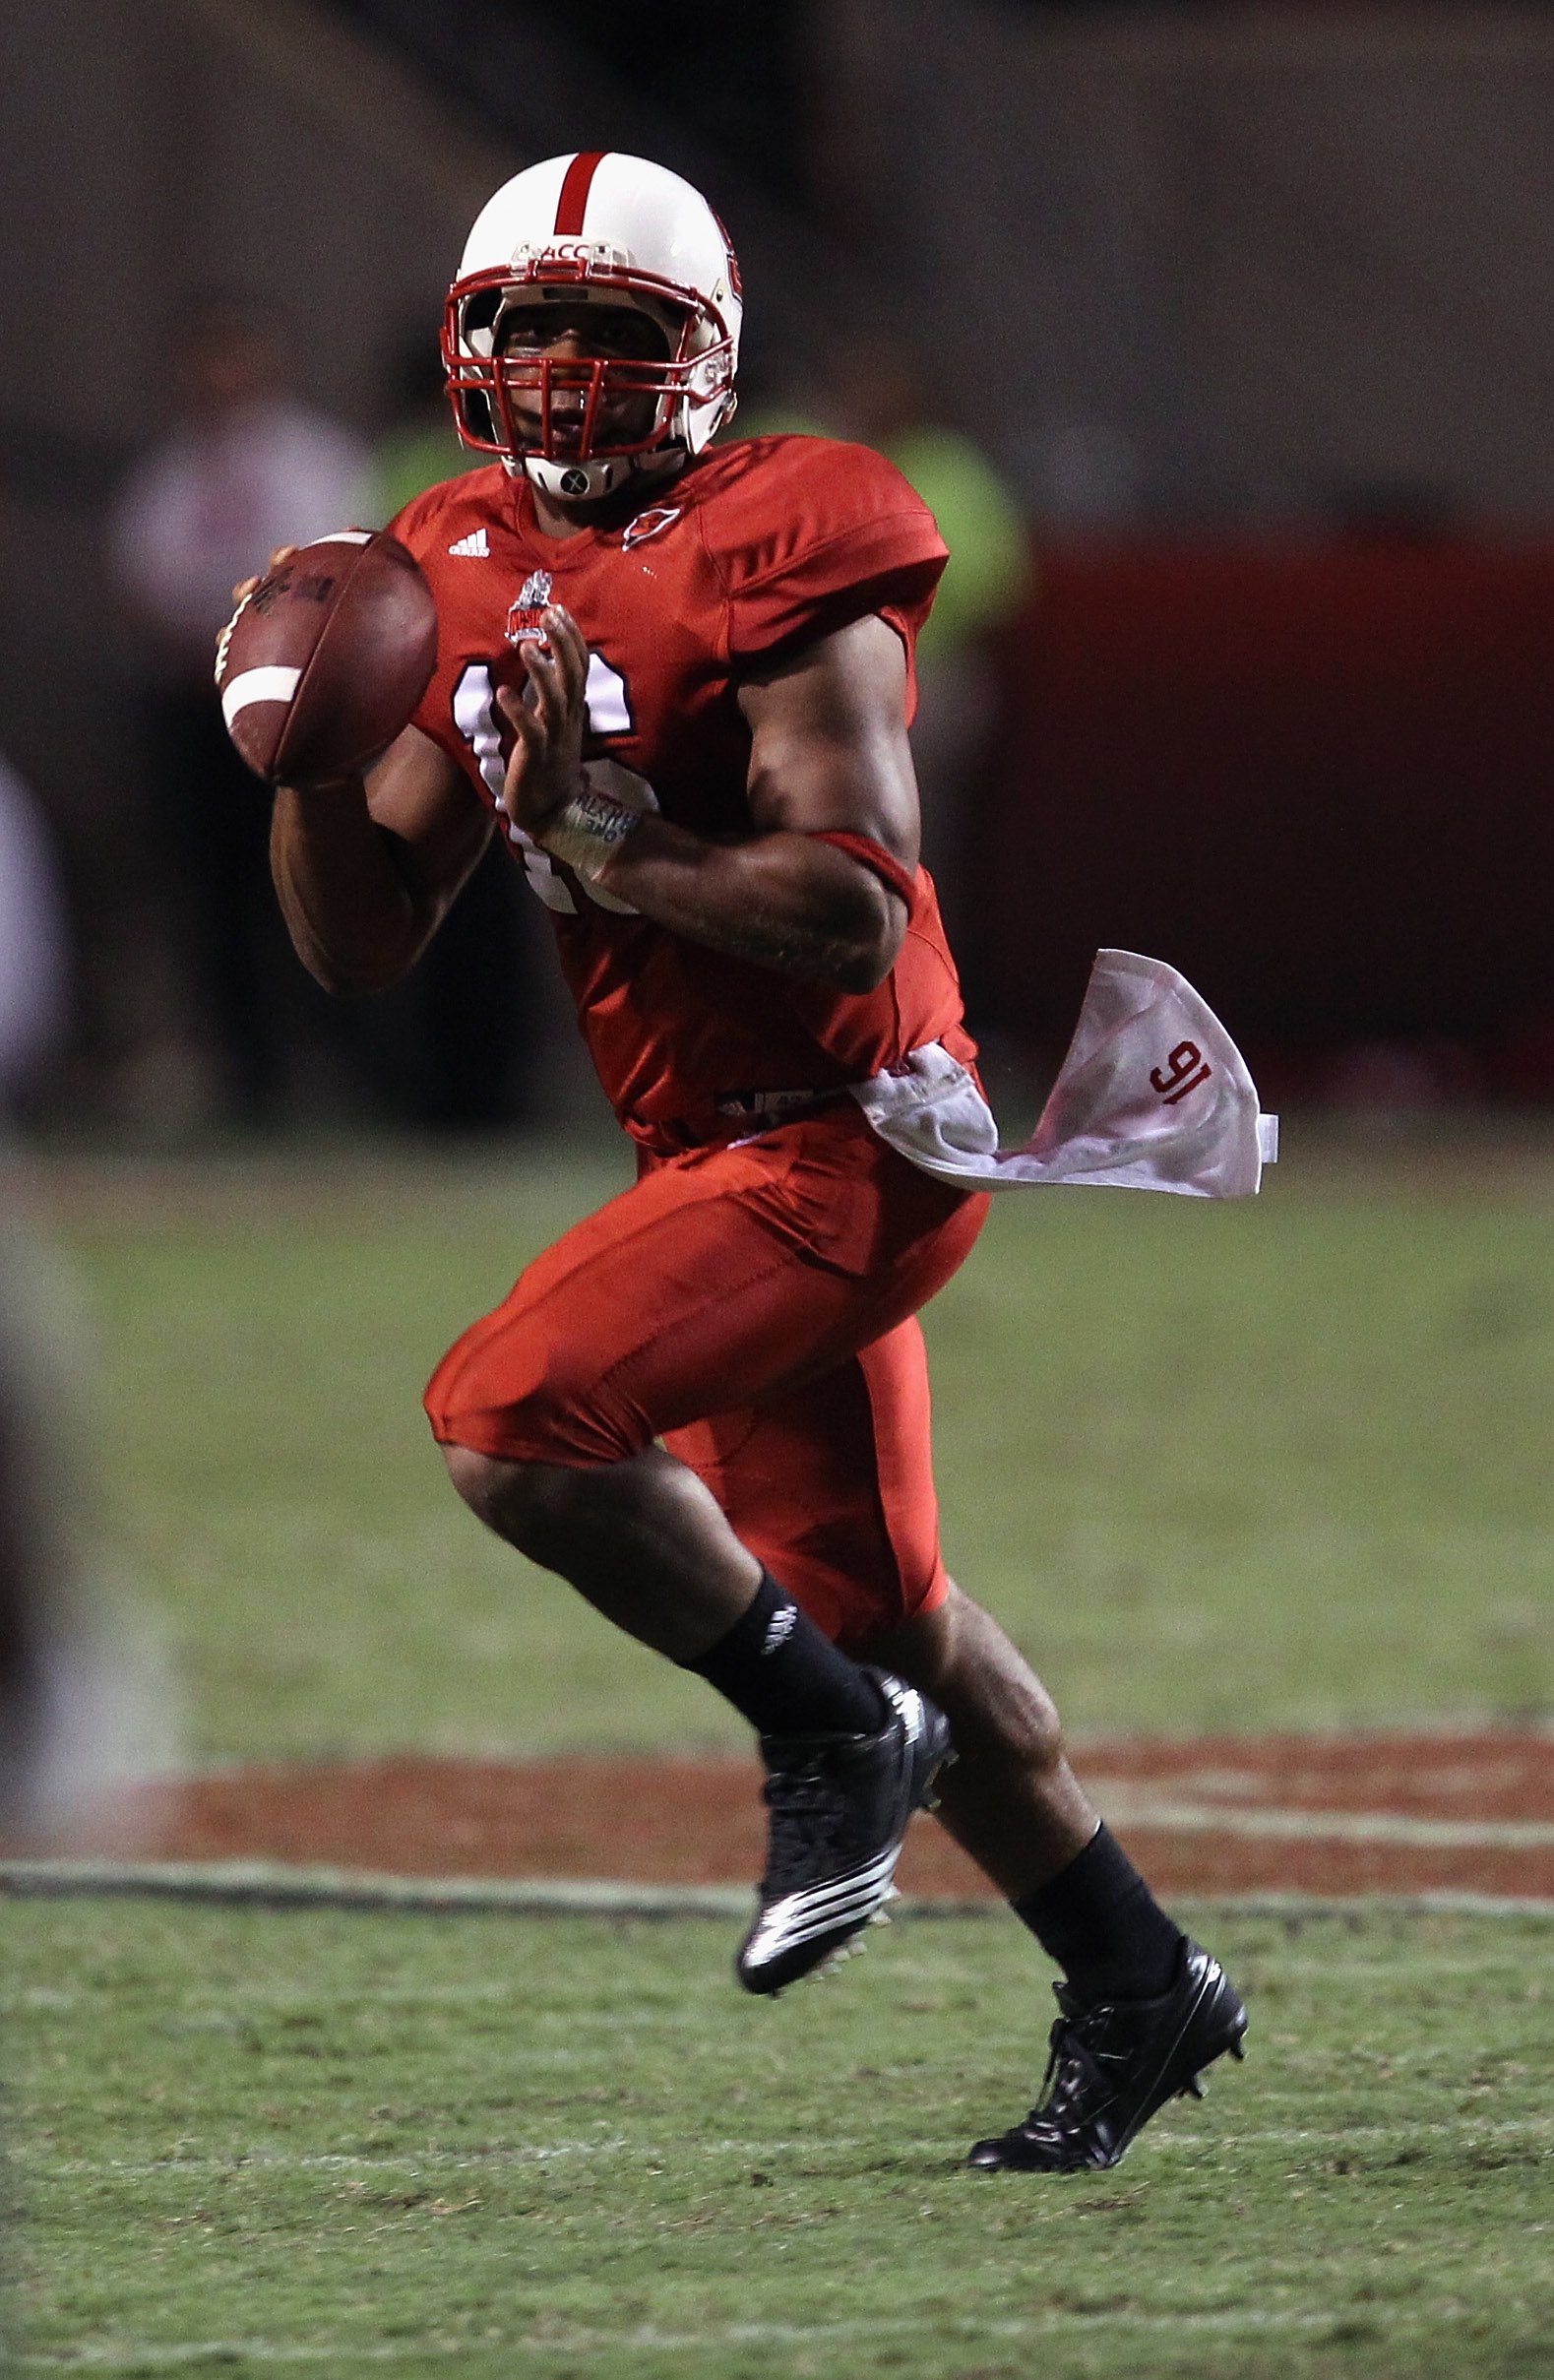 RALEIGH, NC - SEPTEMBER 16:  Russell Wilson #16 of the North Carolina State Wolfpack runs with the ball against the Cincinnati Bearcats during their game at Carter-Finley Stadium on September 16, 2010 in Raleigh, North Carolina.  (Photo by Streeter Lecka/